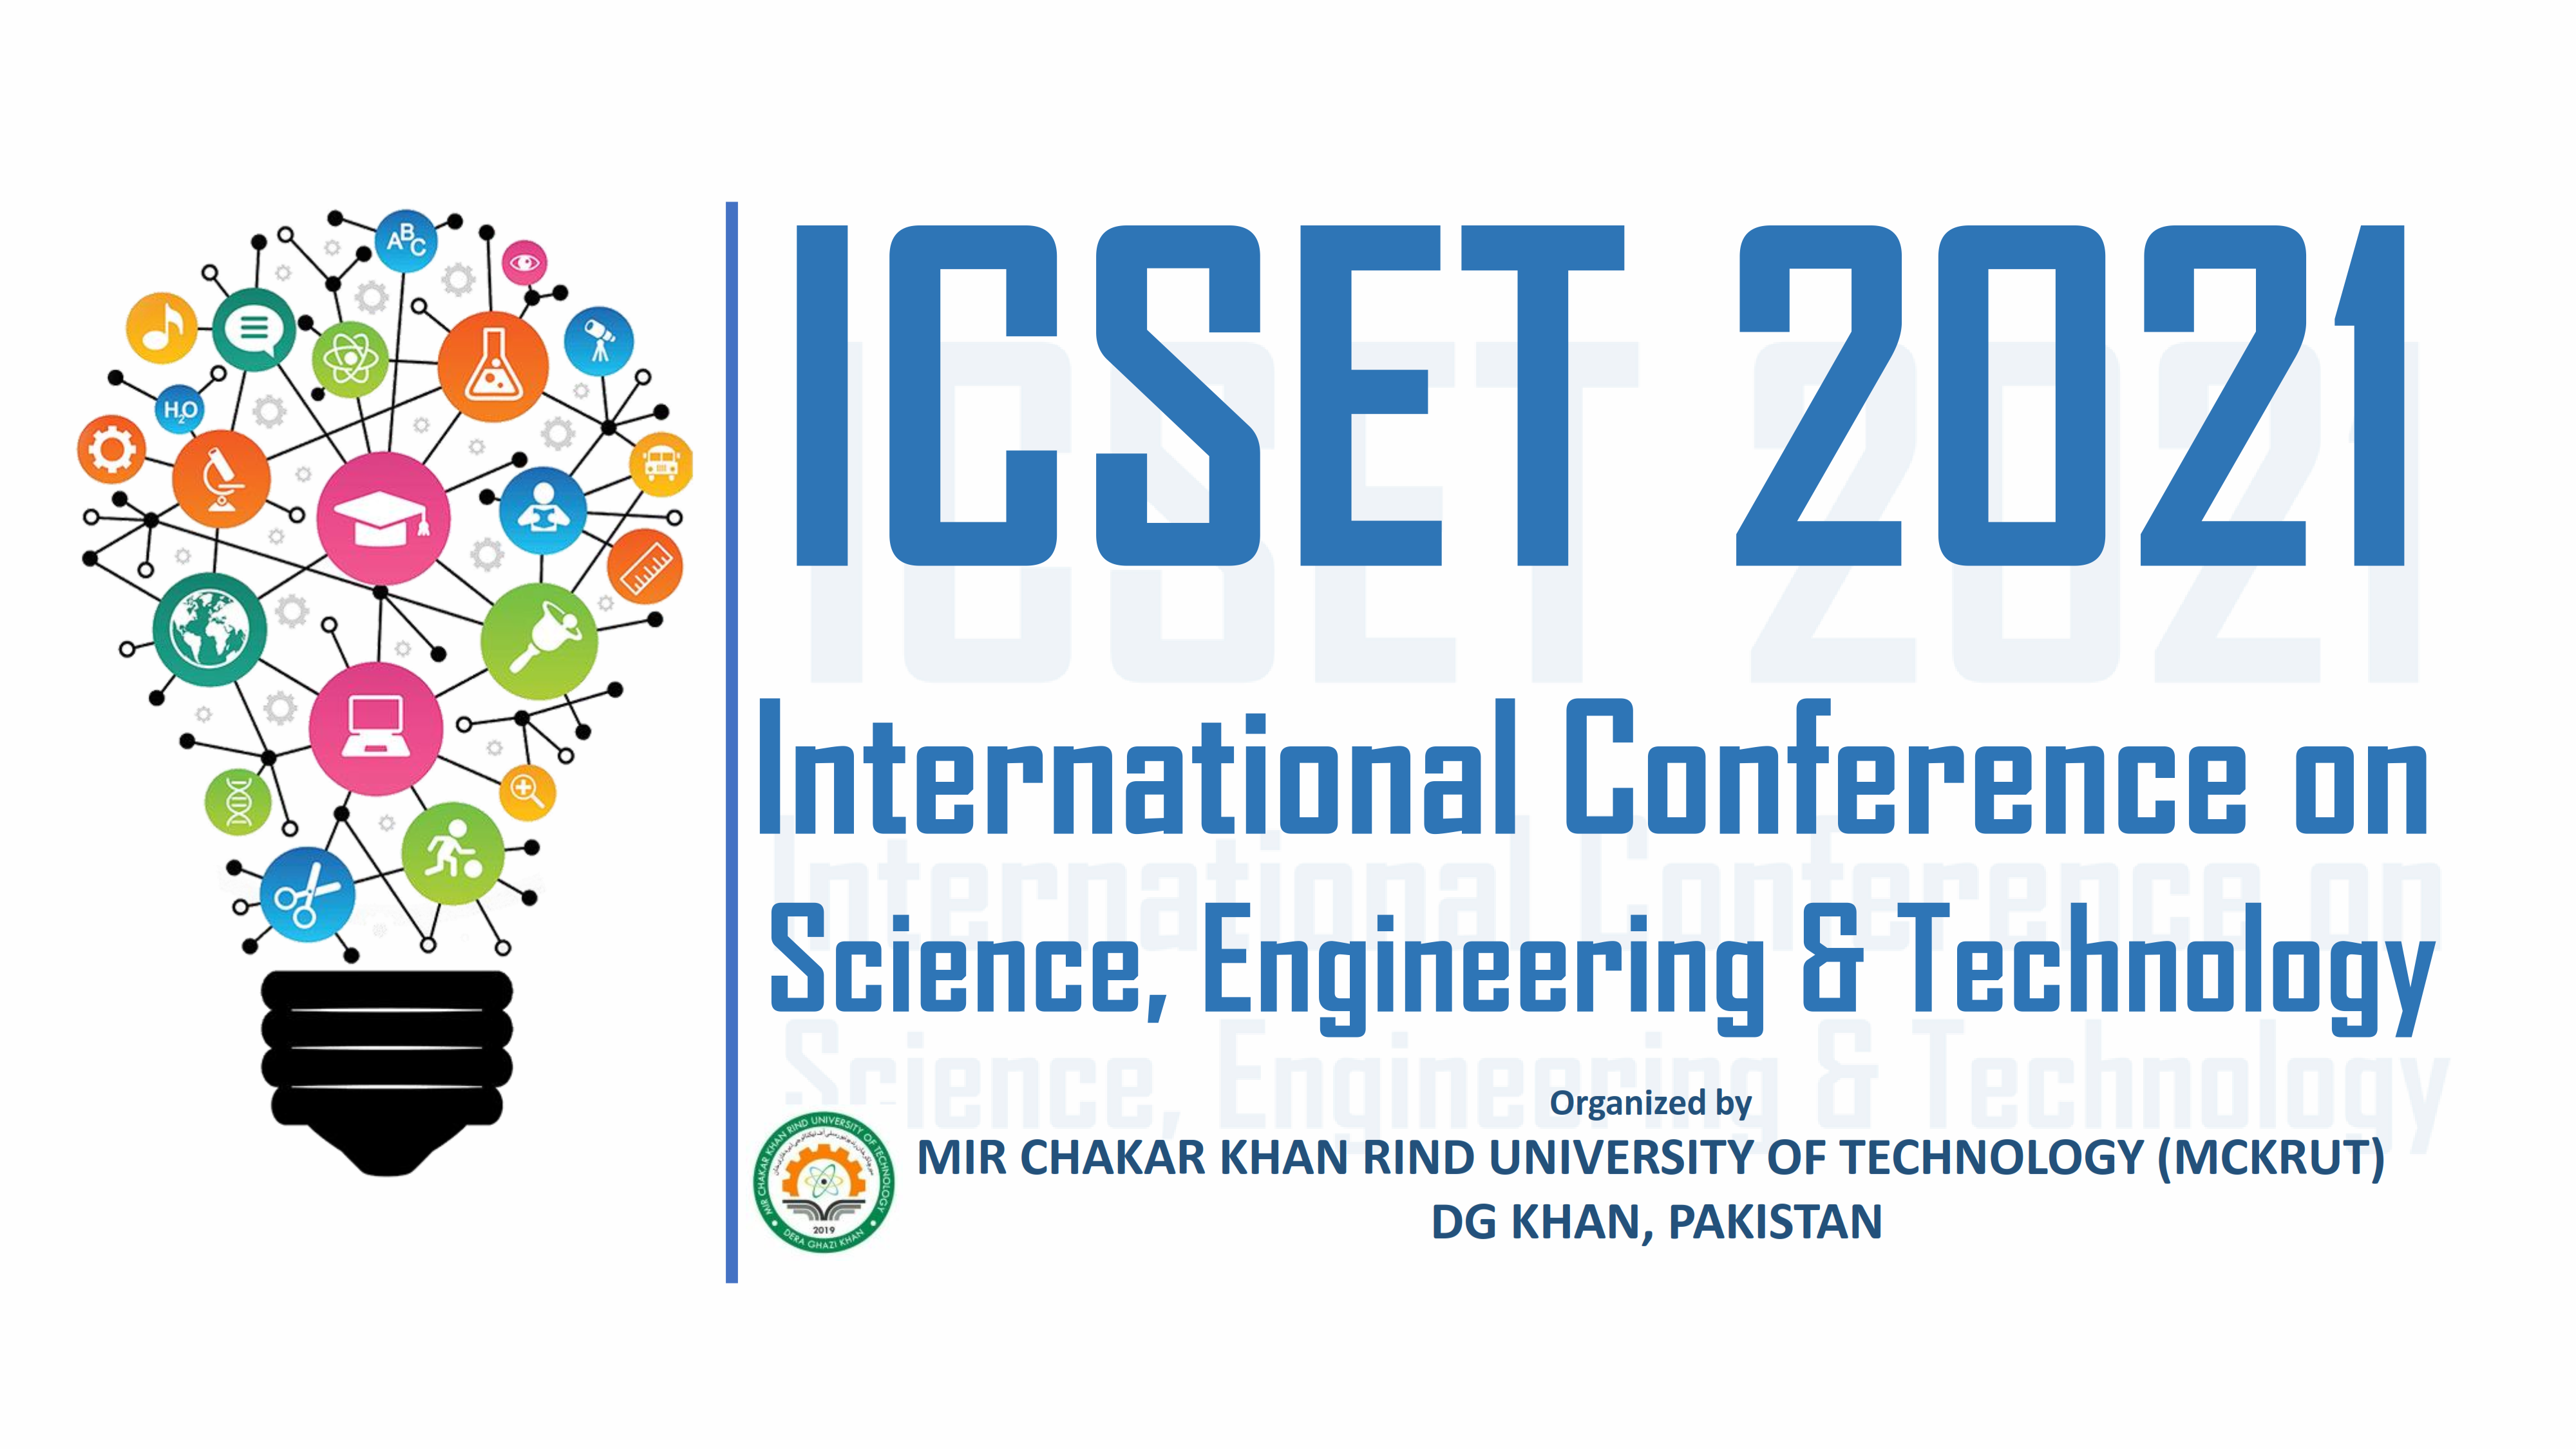 1st International Conference on Science, Engineering & Technology